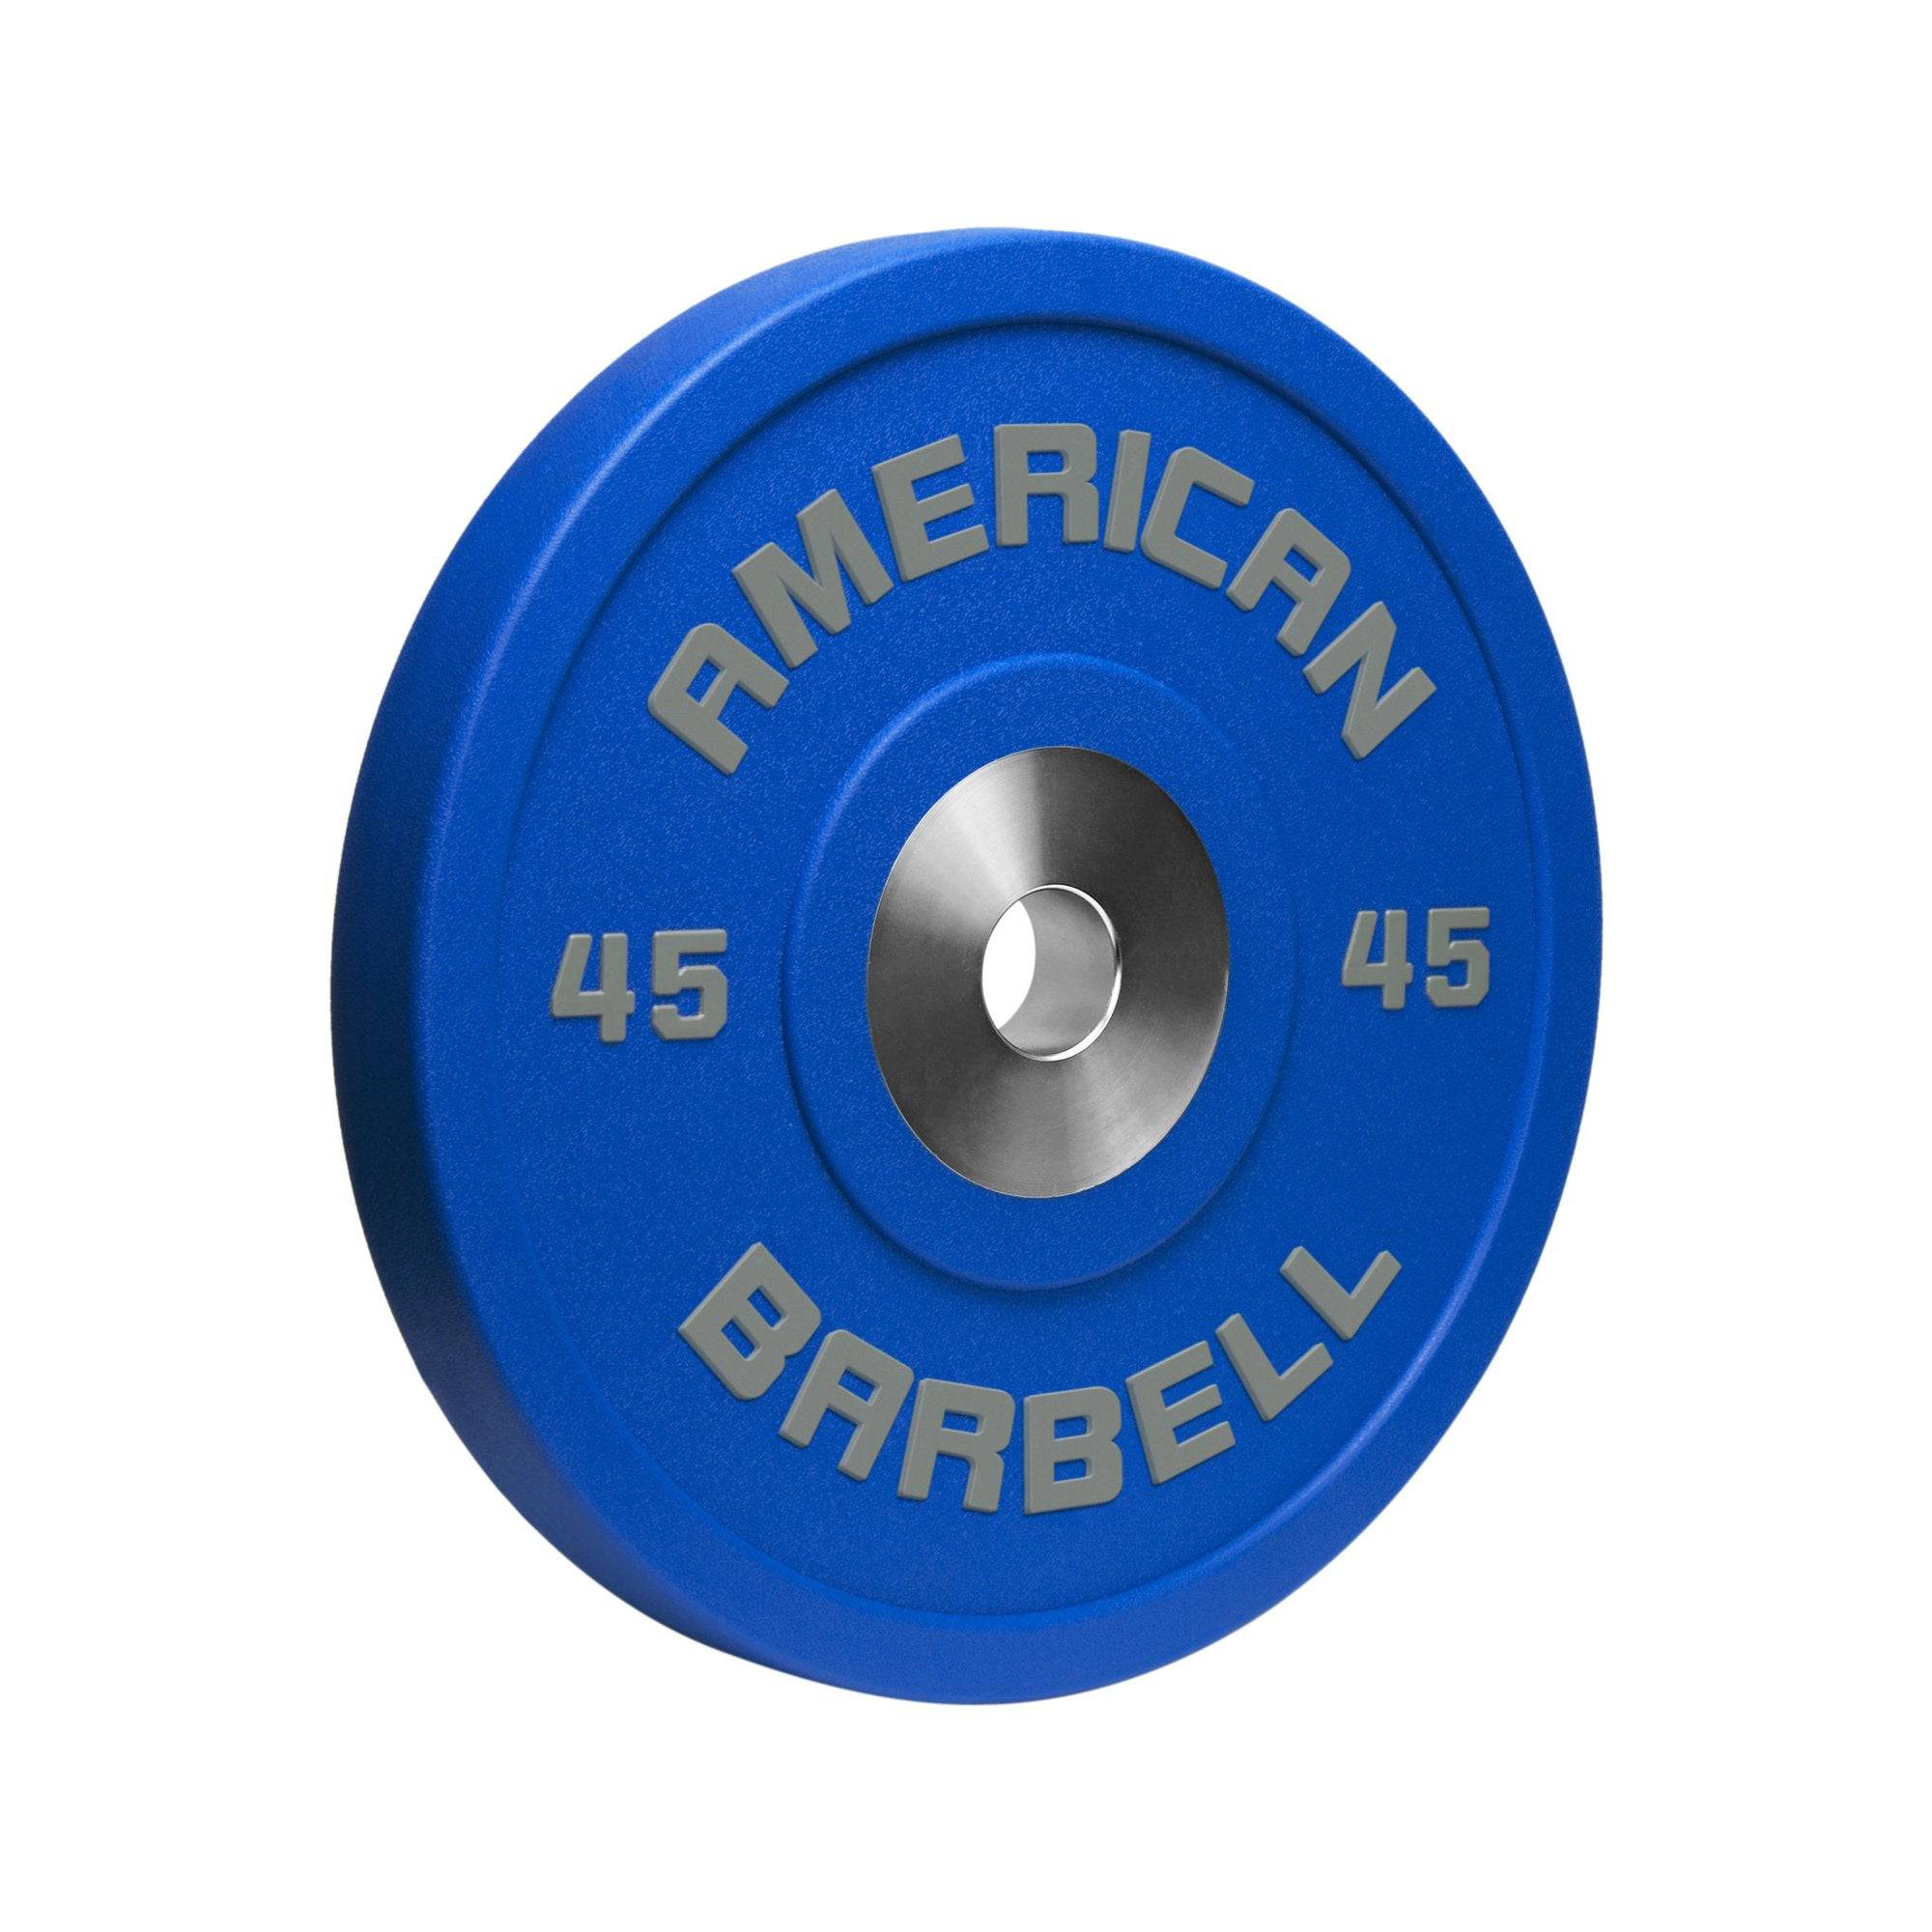 American Barbell | Bumper Plates - Color Urethane Pro Series - Pounds - XTC Fitness - Exercise Equipment Superstore - Canada - Competition Bumper Plates